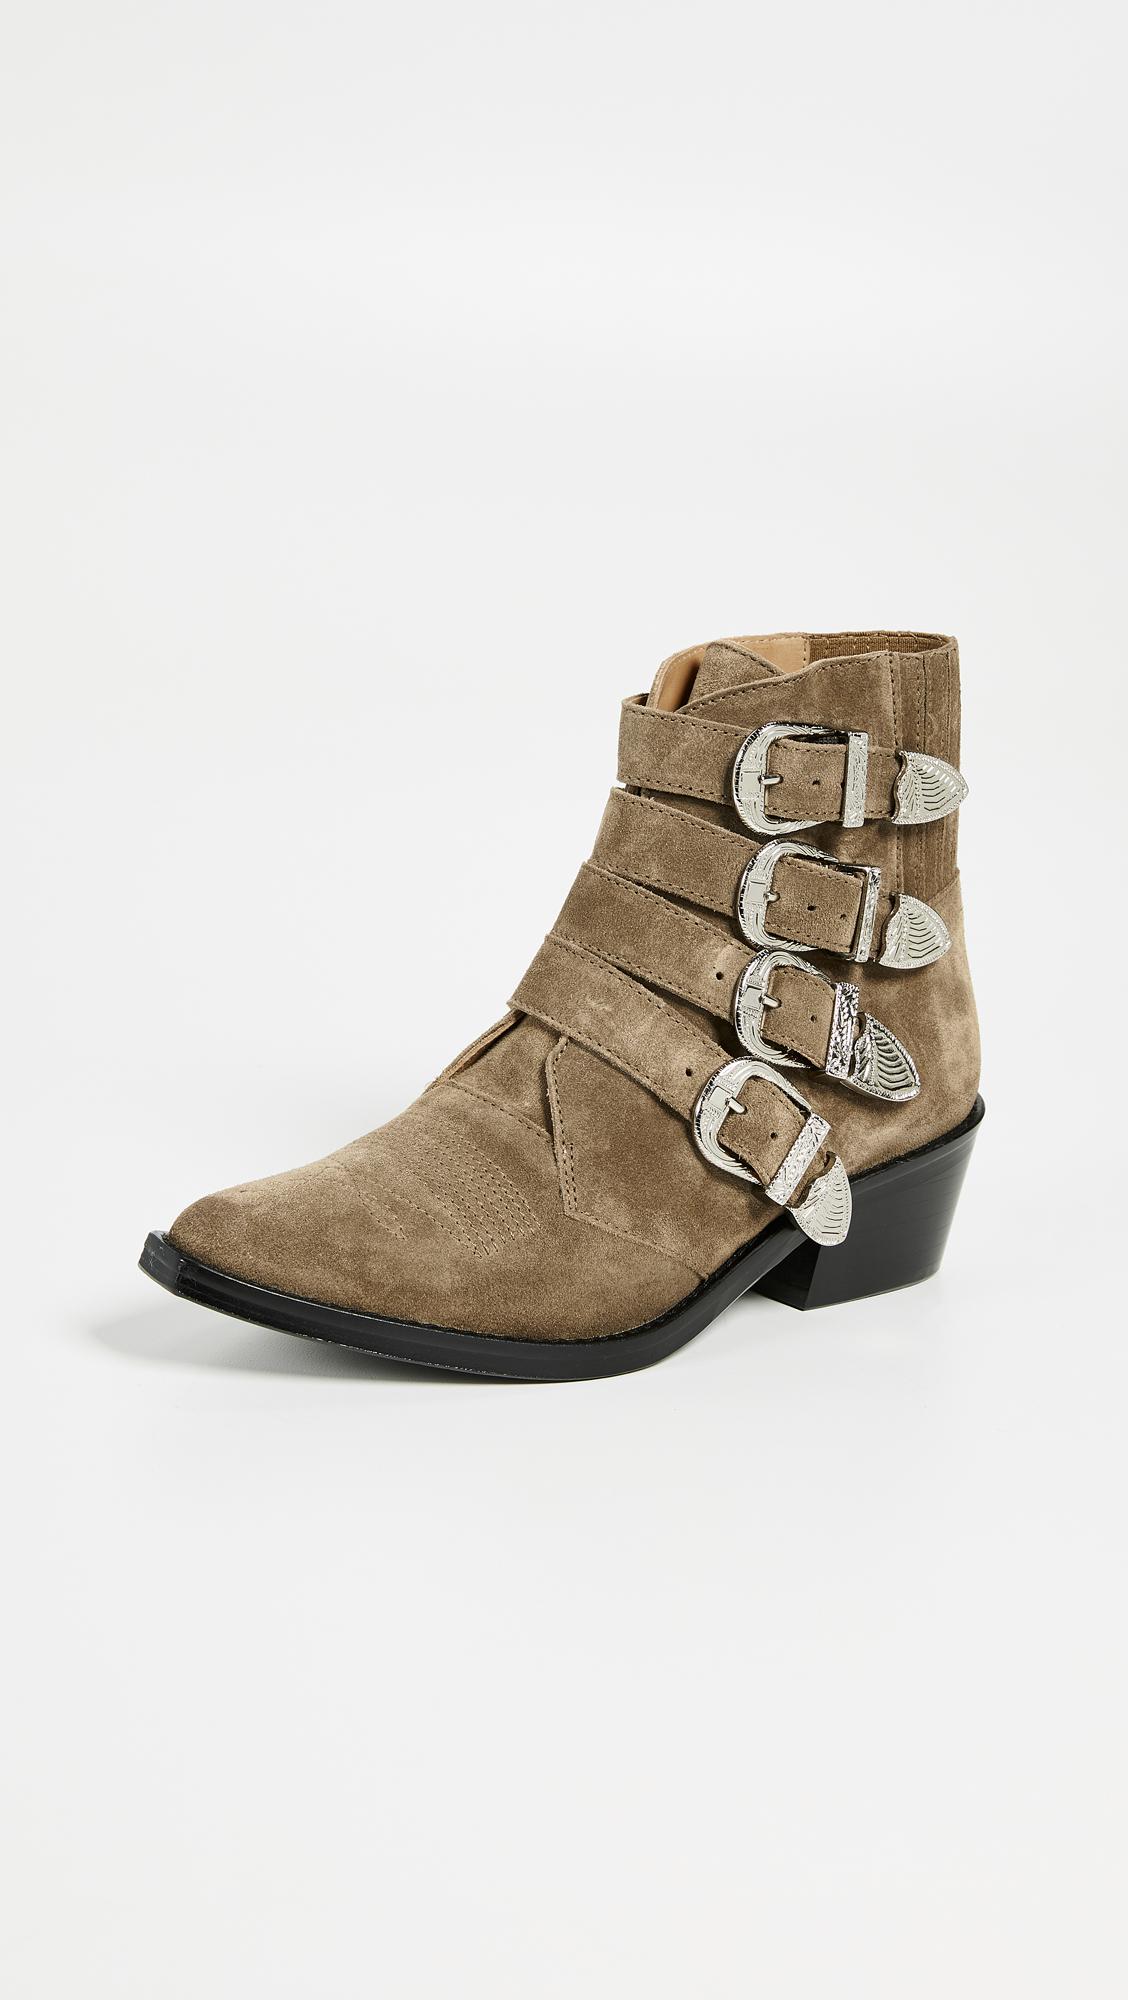 Toga Suede Buckled Booties in Khaki (Brown) - Lyst